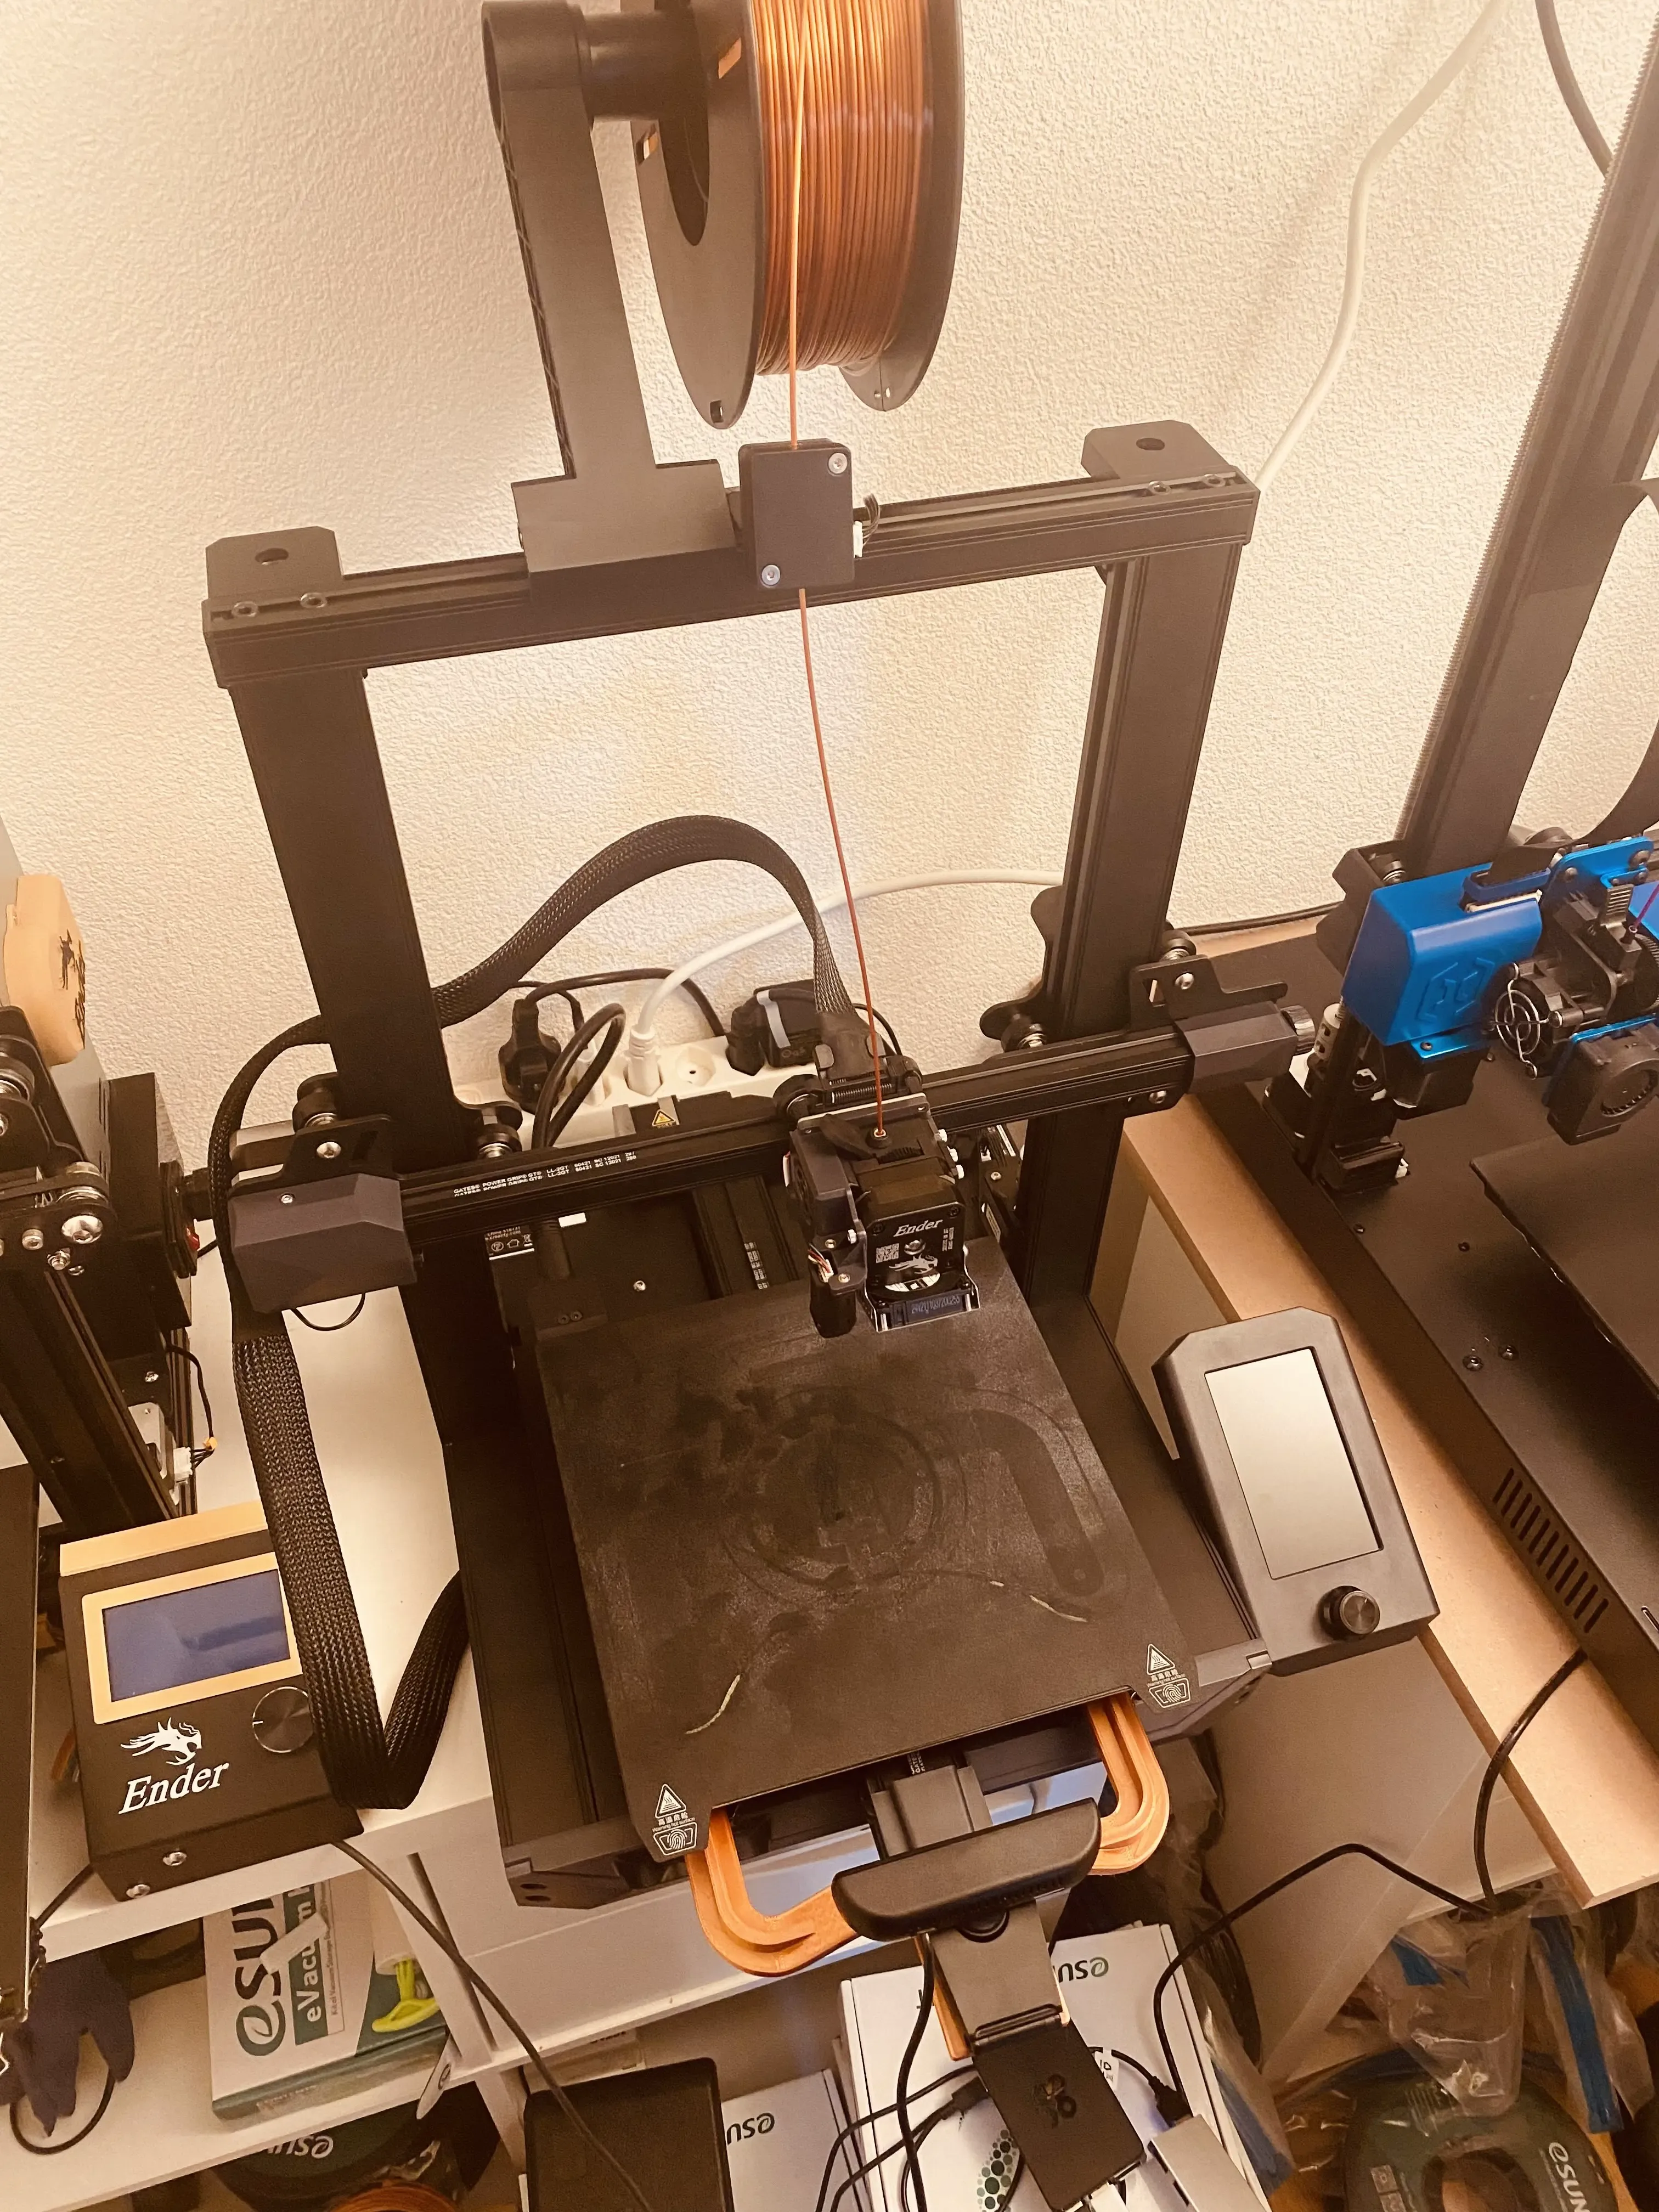 Handle for the Ender 3 S1 with Webcam support by ST3MP